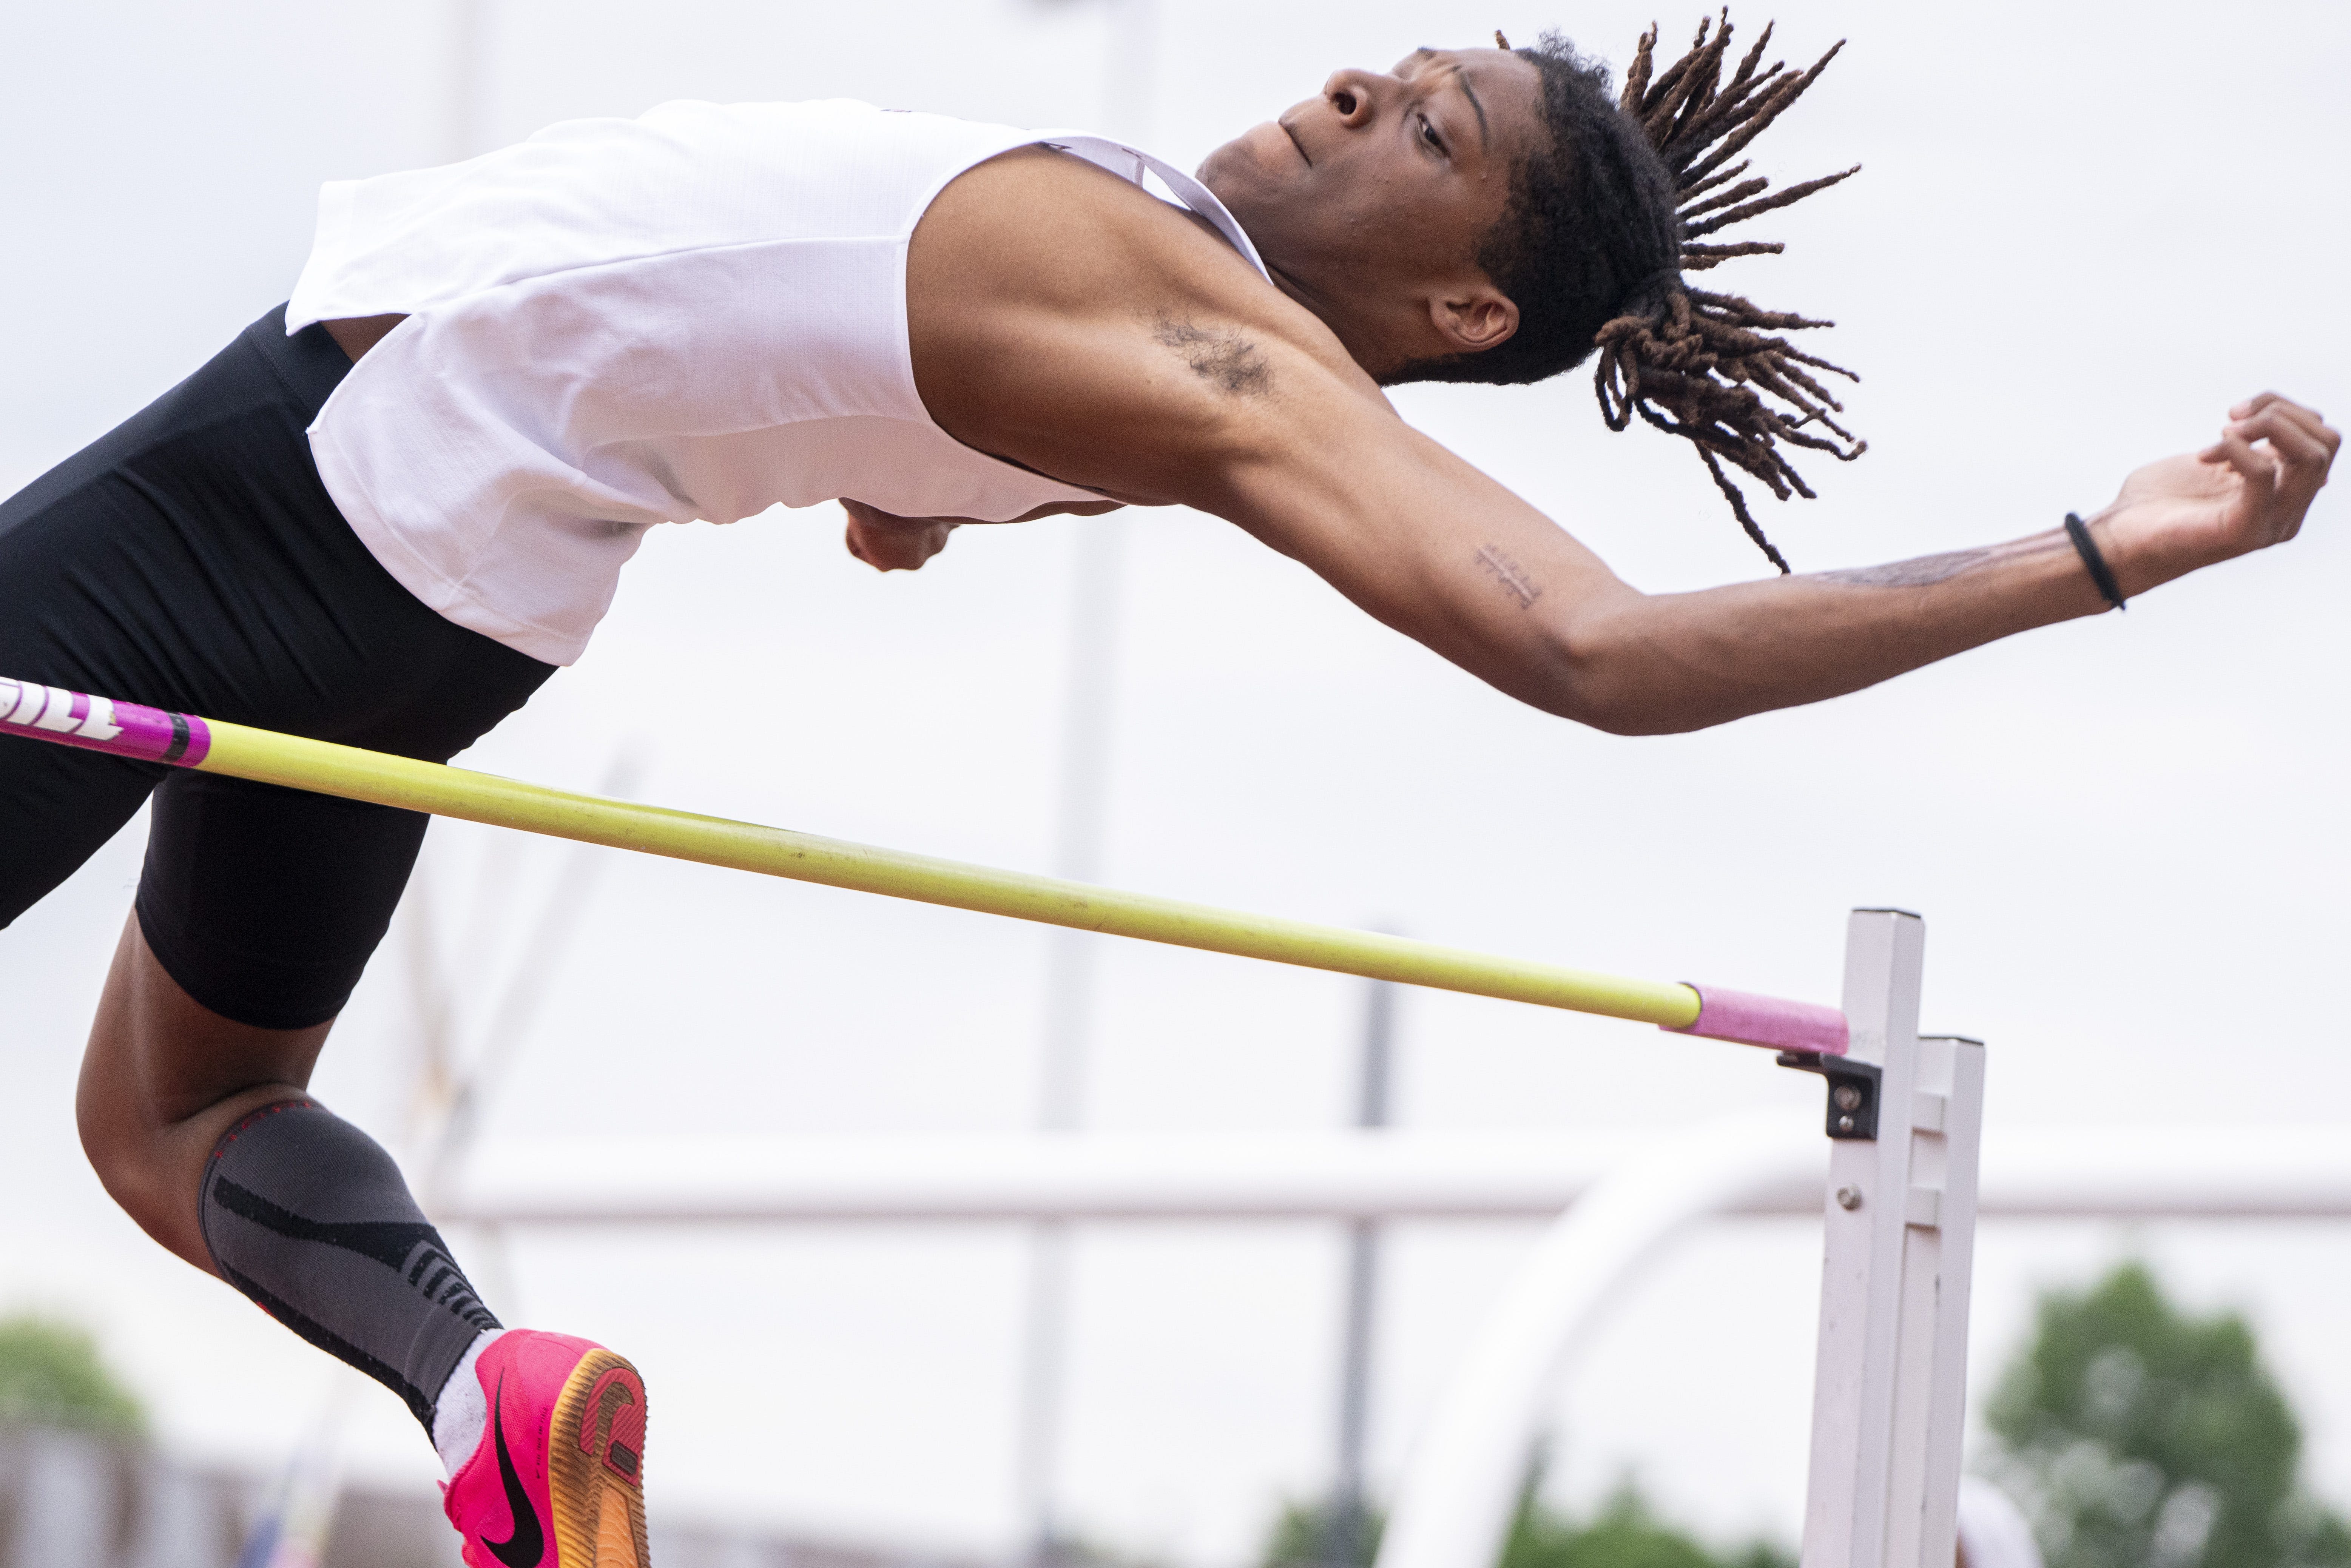 2 months ago, he was fighting for his life. Thursday, he jumped his way to track regional.